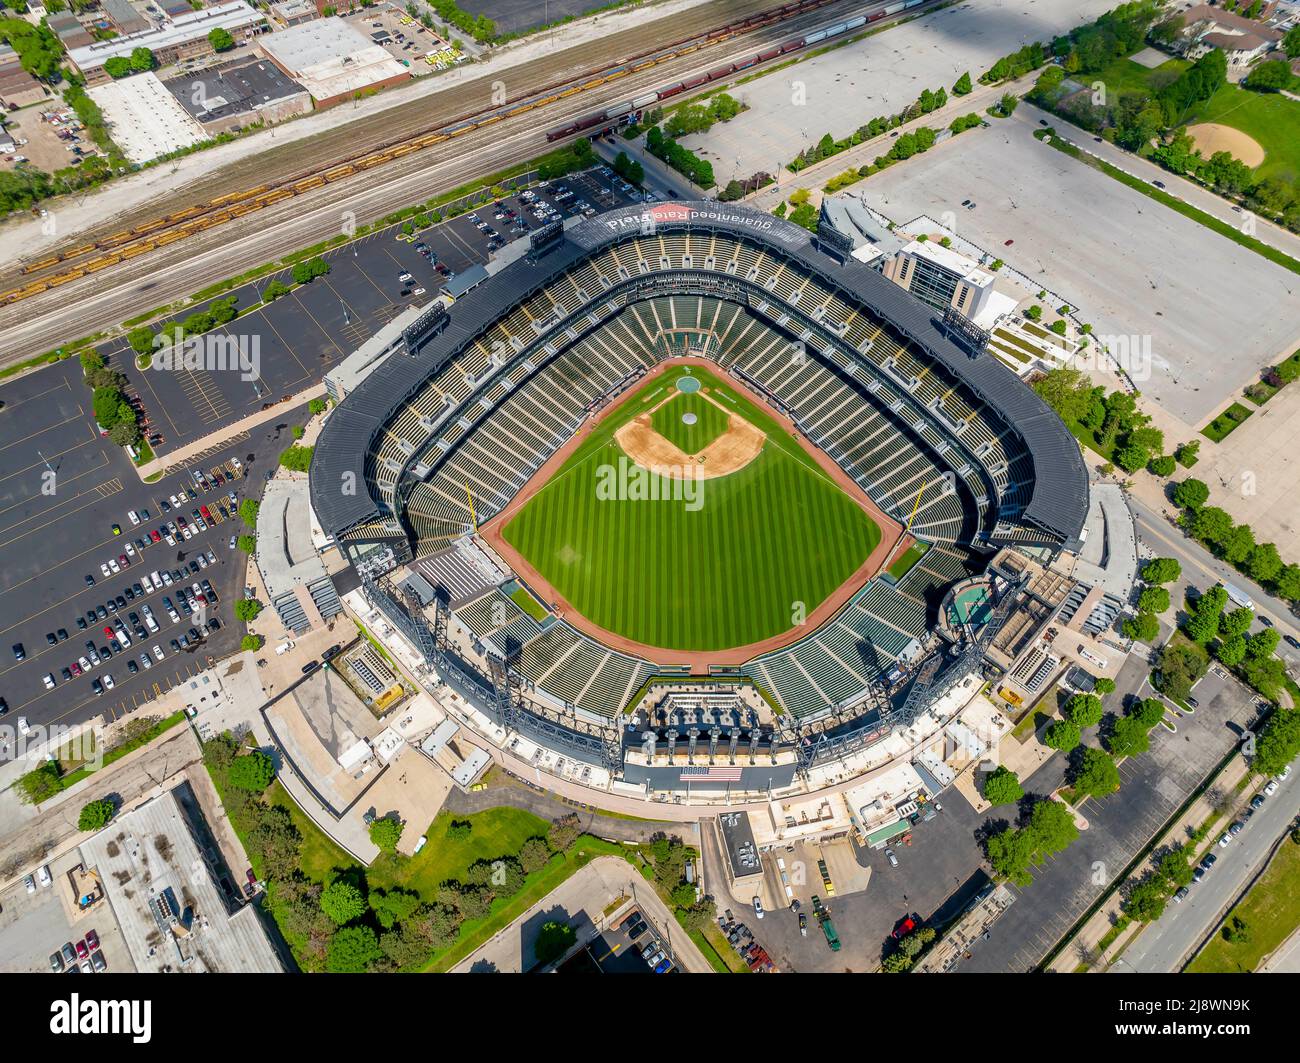 An aerial view of Guaranteed Rate Field, Sunday, Feb. 7, 2021, in